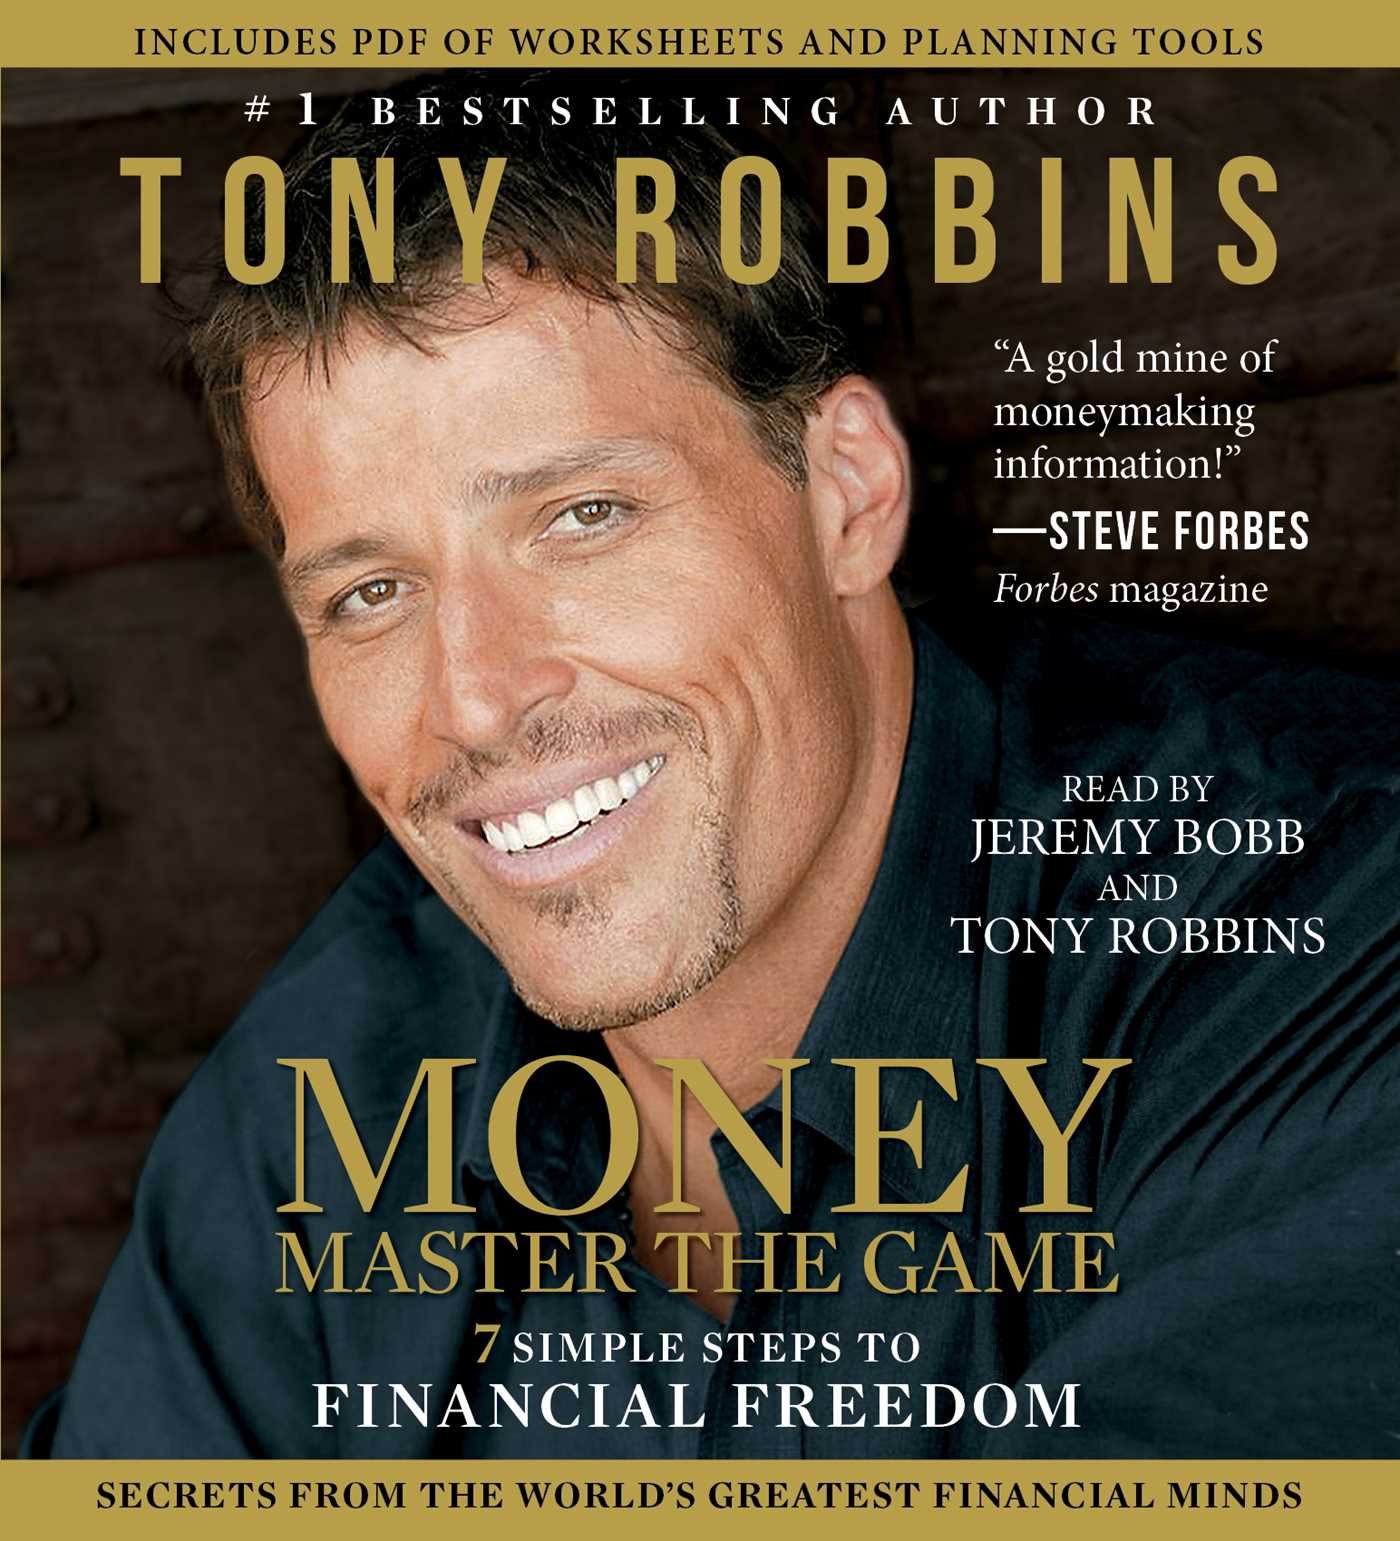 Money Master the Game: 7 Simple Steps to Financial Freedom by Tony Robbins